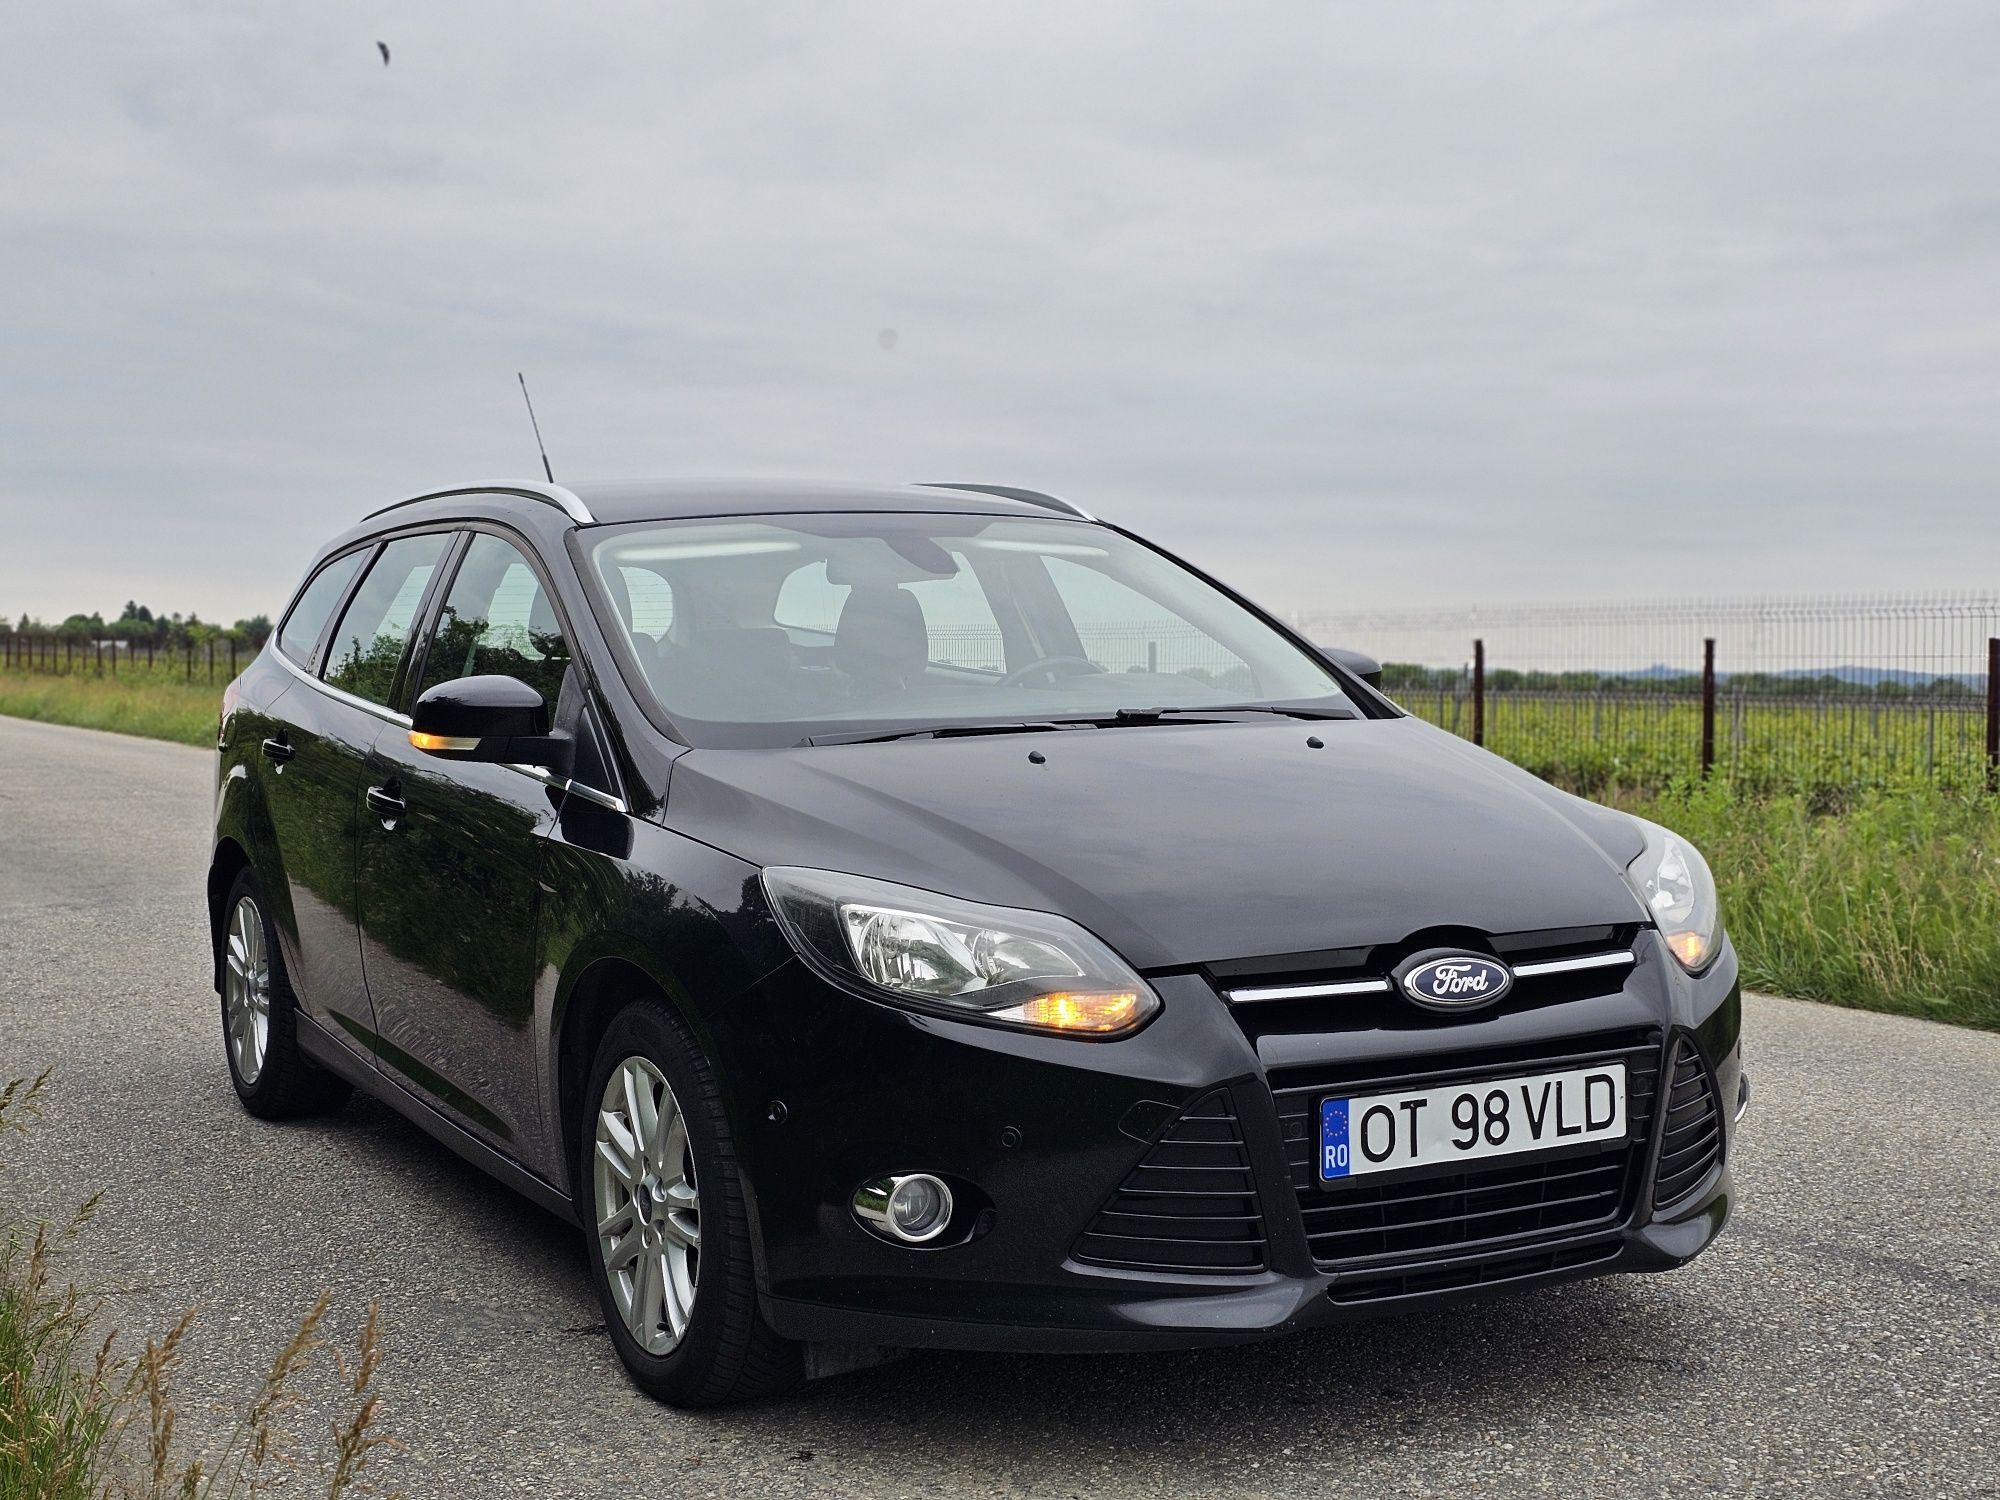 Ford Focus 3 1.6 ecoboost 150 cp 2012 e5